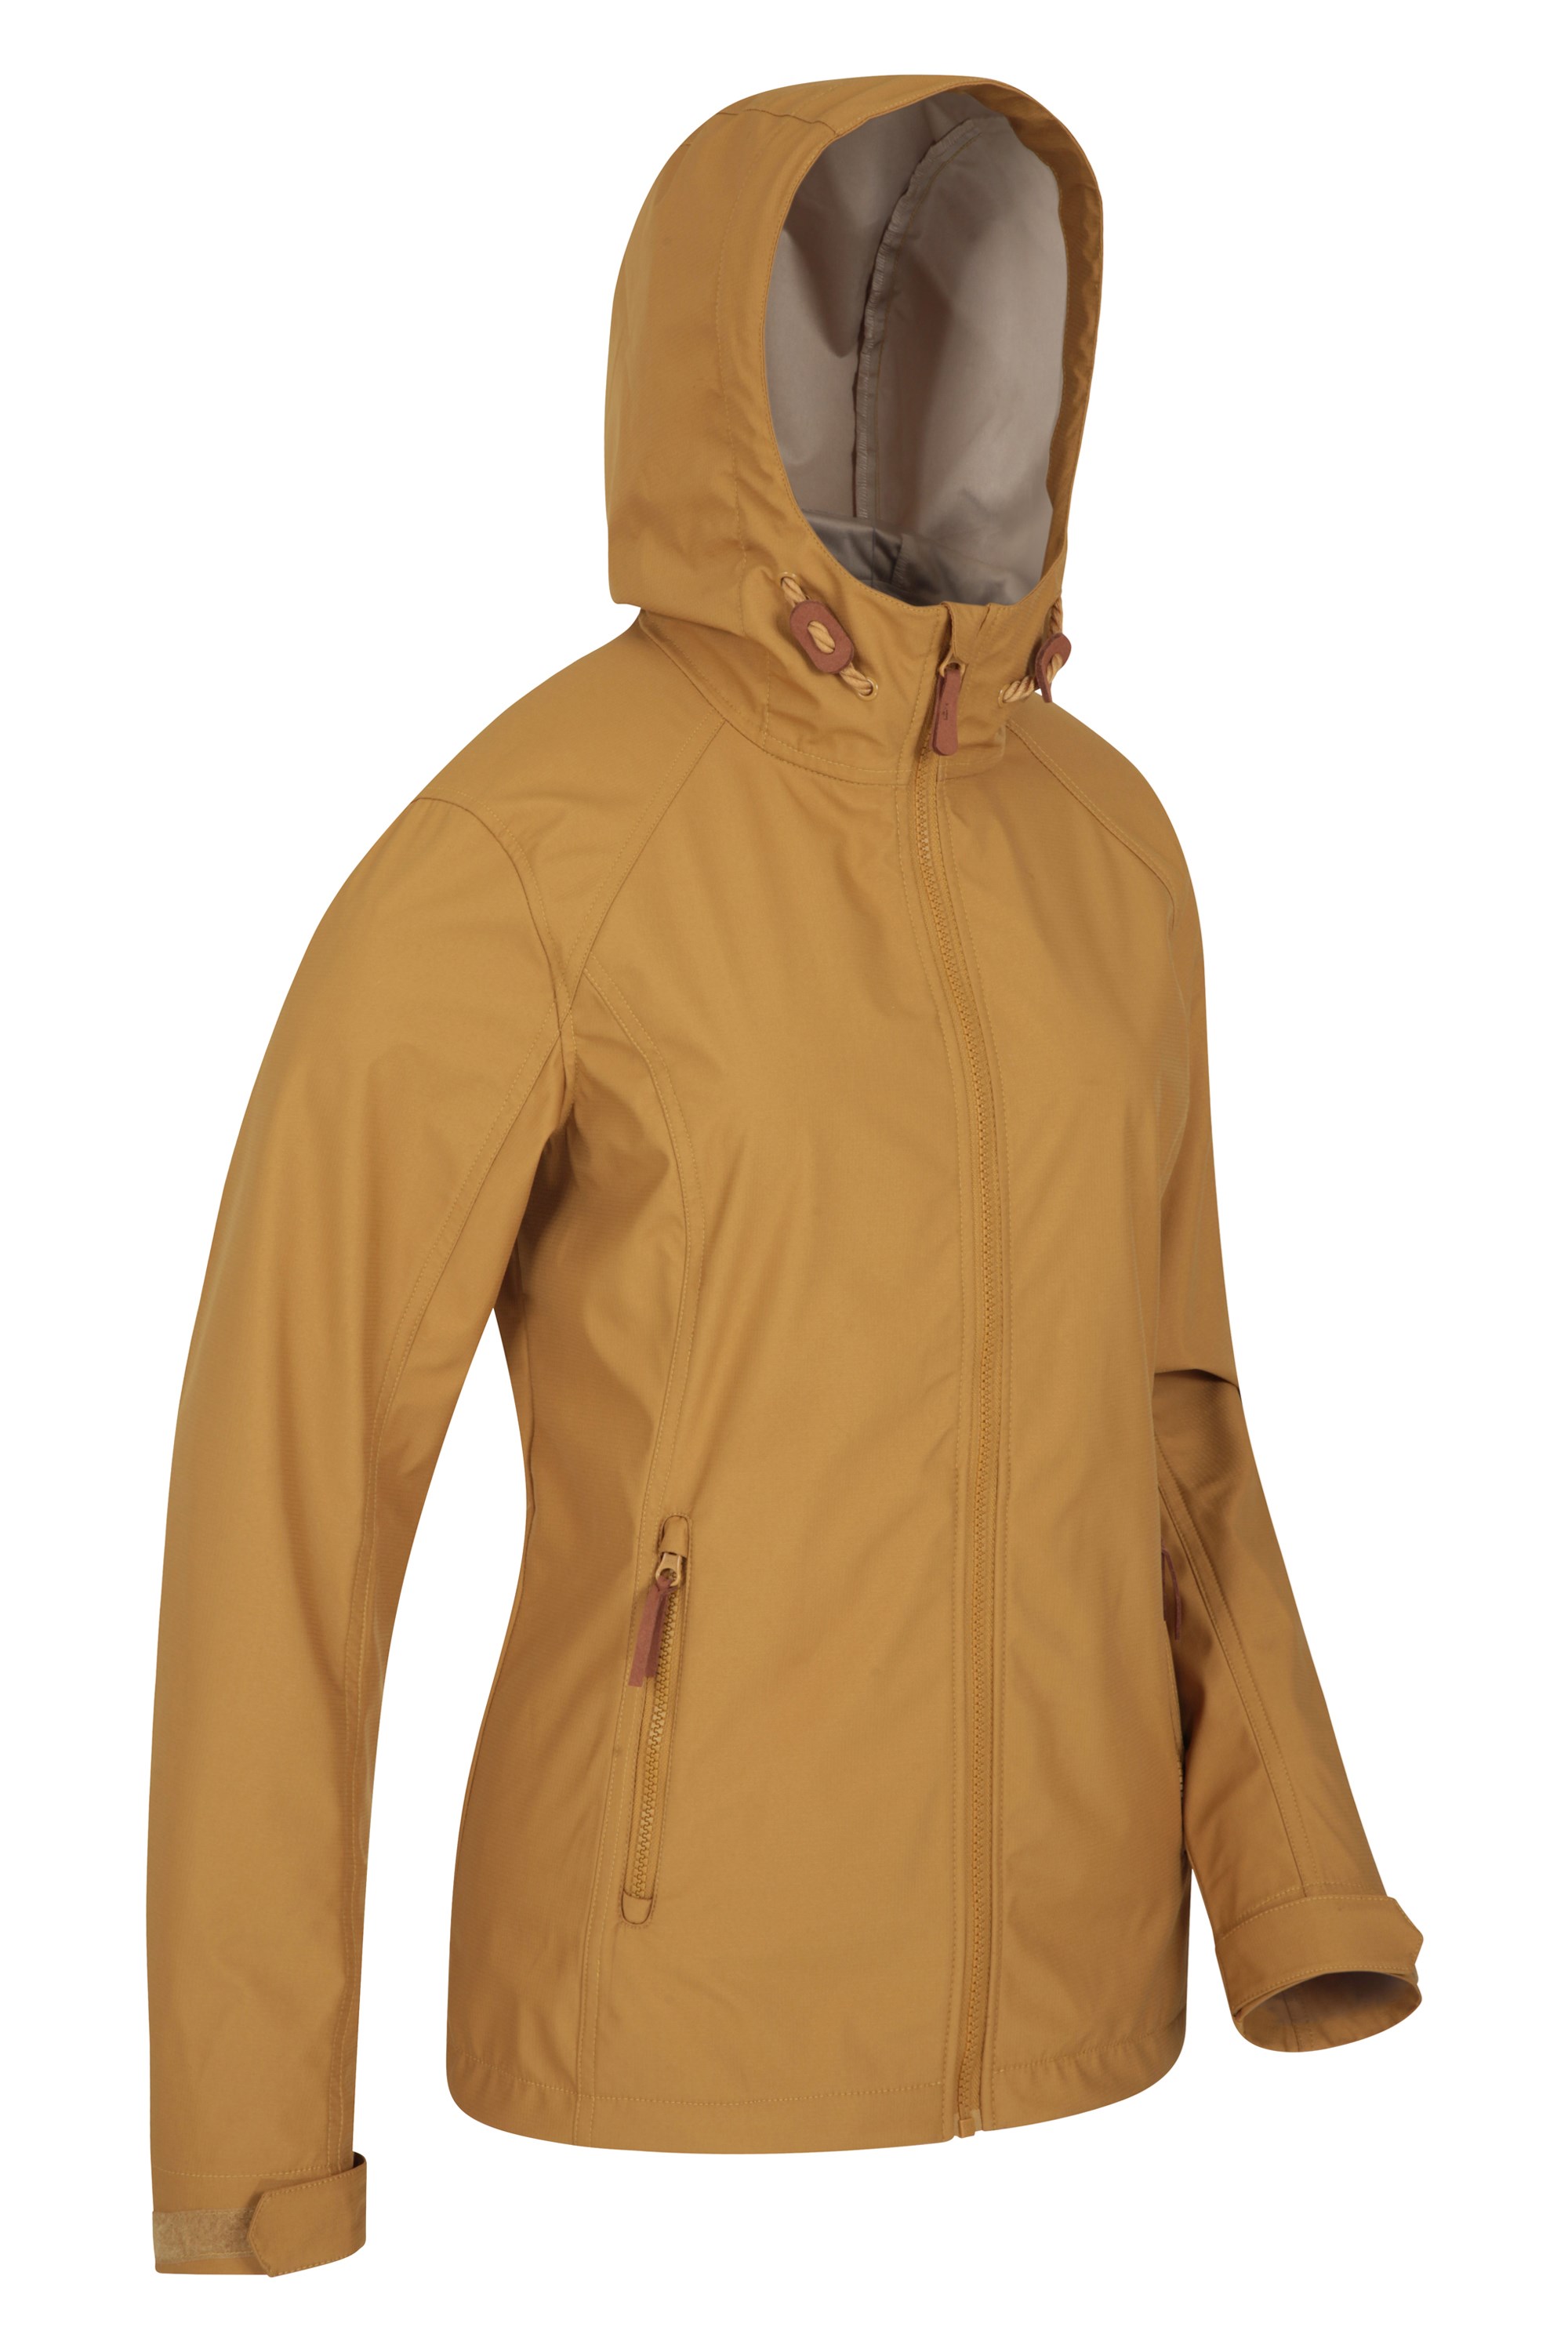 for Spring Mountain Warehouse Iona Womens Water Resistant Softshell Jacket Lightweight Breathable